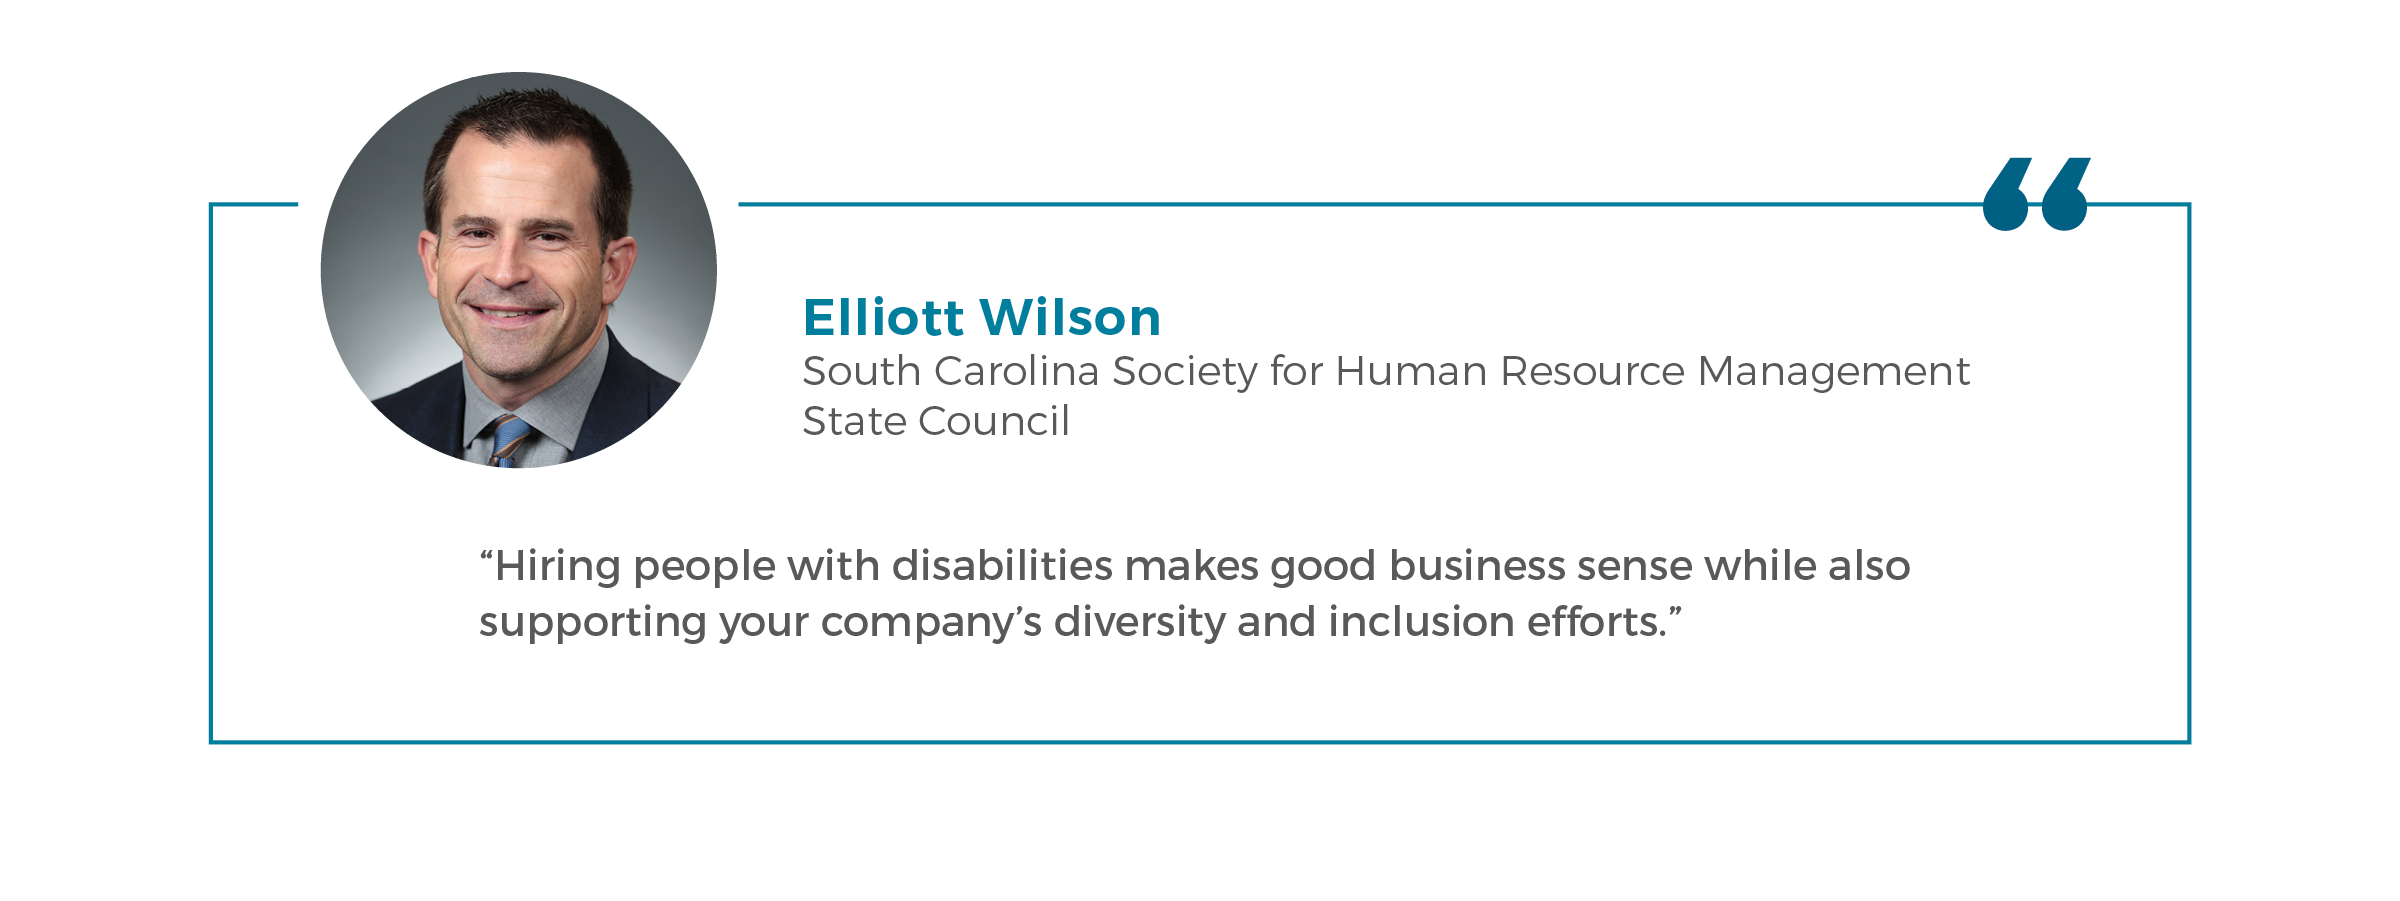 A headshot of Elliott Wilson from South Carolina Society for Human Resource Management State Council with the quote 